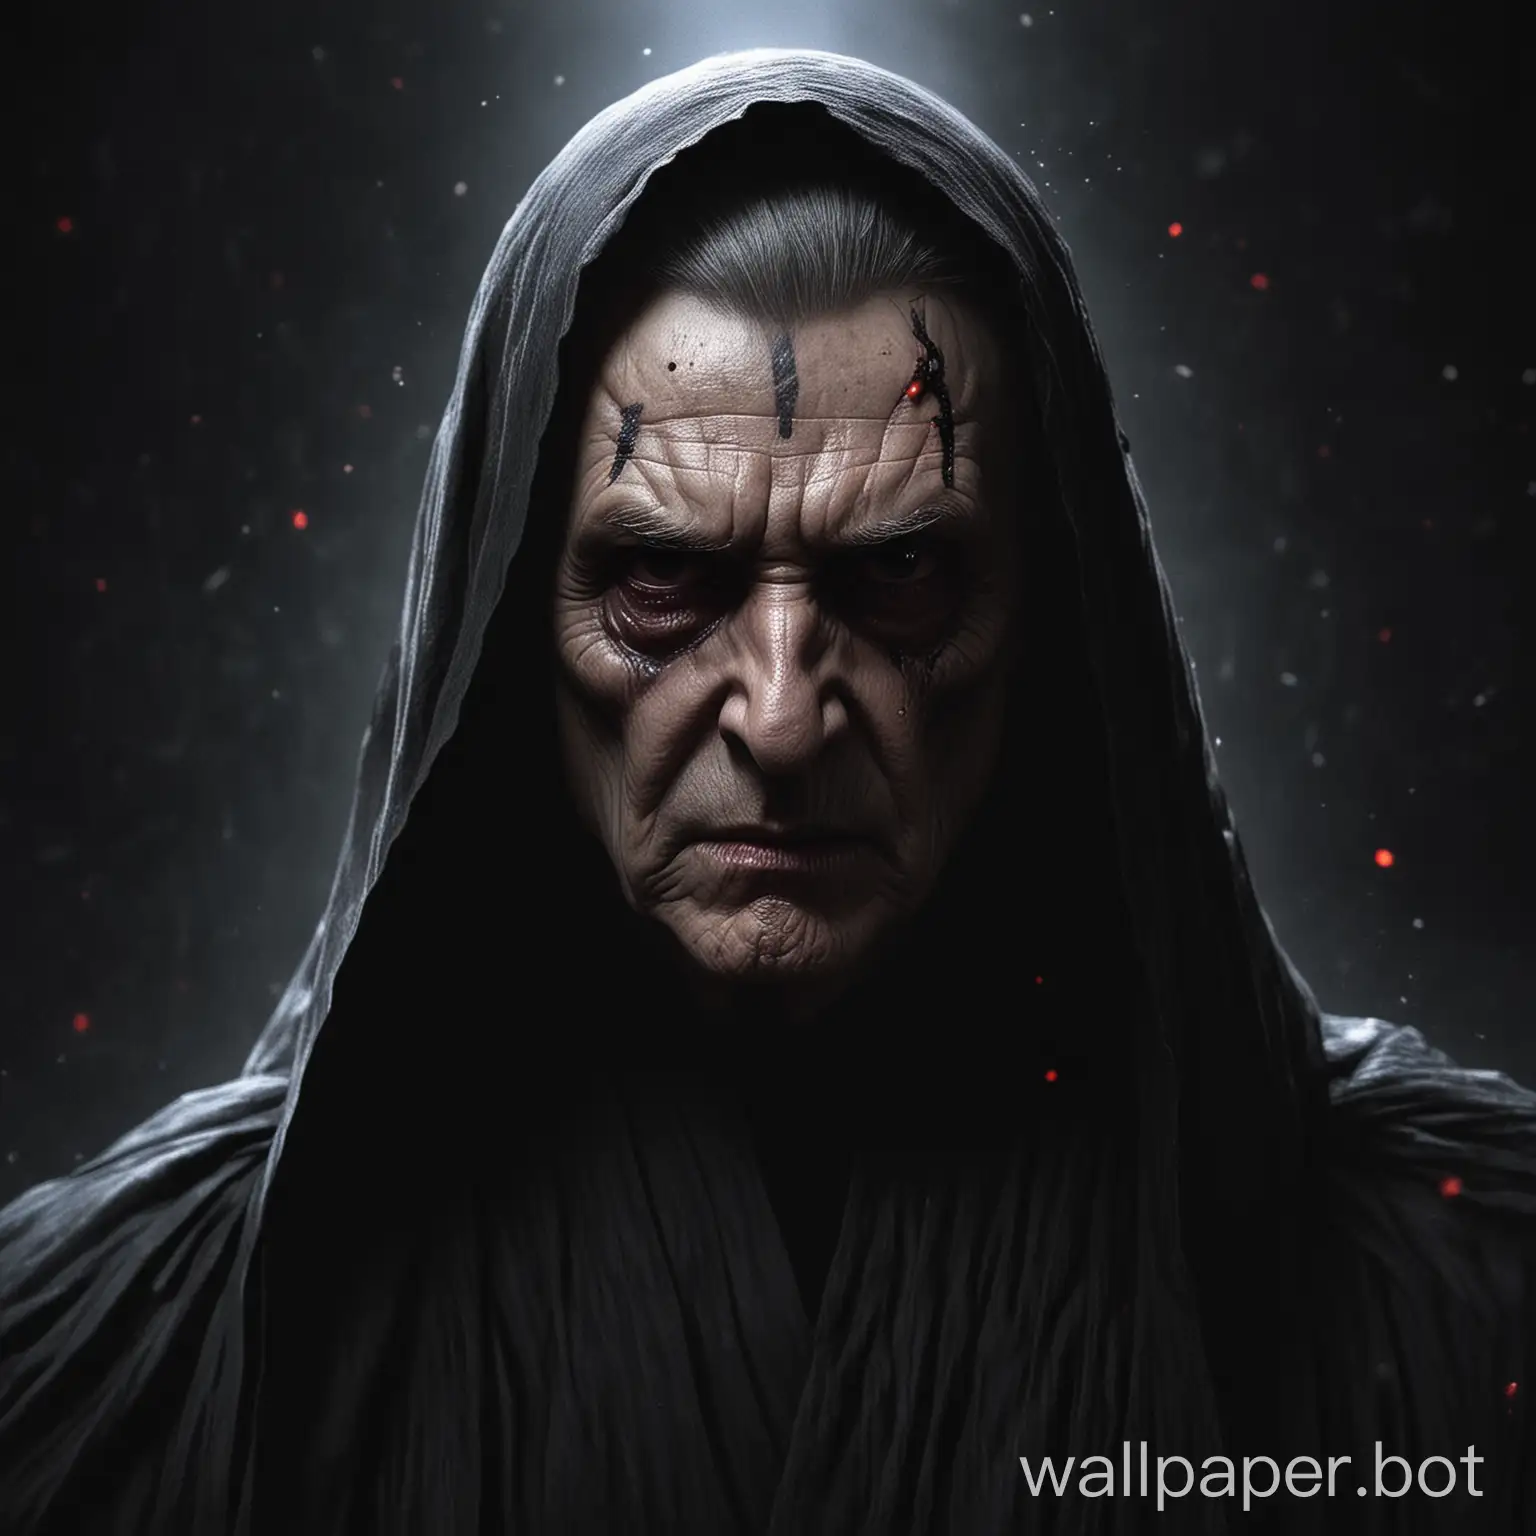 Did you ever hear the tragedy of Darth Plagueis The Wise? I thought not. It’s not a story the Jedi would tell you. It’s a Sith legend. Darth Plagueis was a Dark Lord of the Sith, so powerful and so wise he could use the Force to influence the midichlorians to create life… He had such a knowledge of the dark side that he could even keep the ones he cared about from dying. The dark side of the Force is a pathway to many abilities some consider to be unnatural. He became so powerful… the only thing he was afraid of was losing his power, which eventually, of course, he did. Unfortunately, he taught his apprentice everything he knew, then his apprentice killed him in his sleep. Ironic. He could save others from death, but not himself.